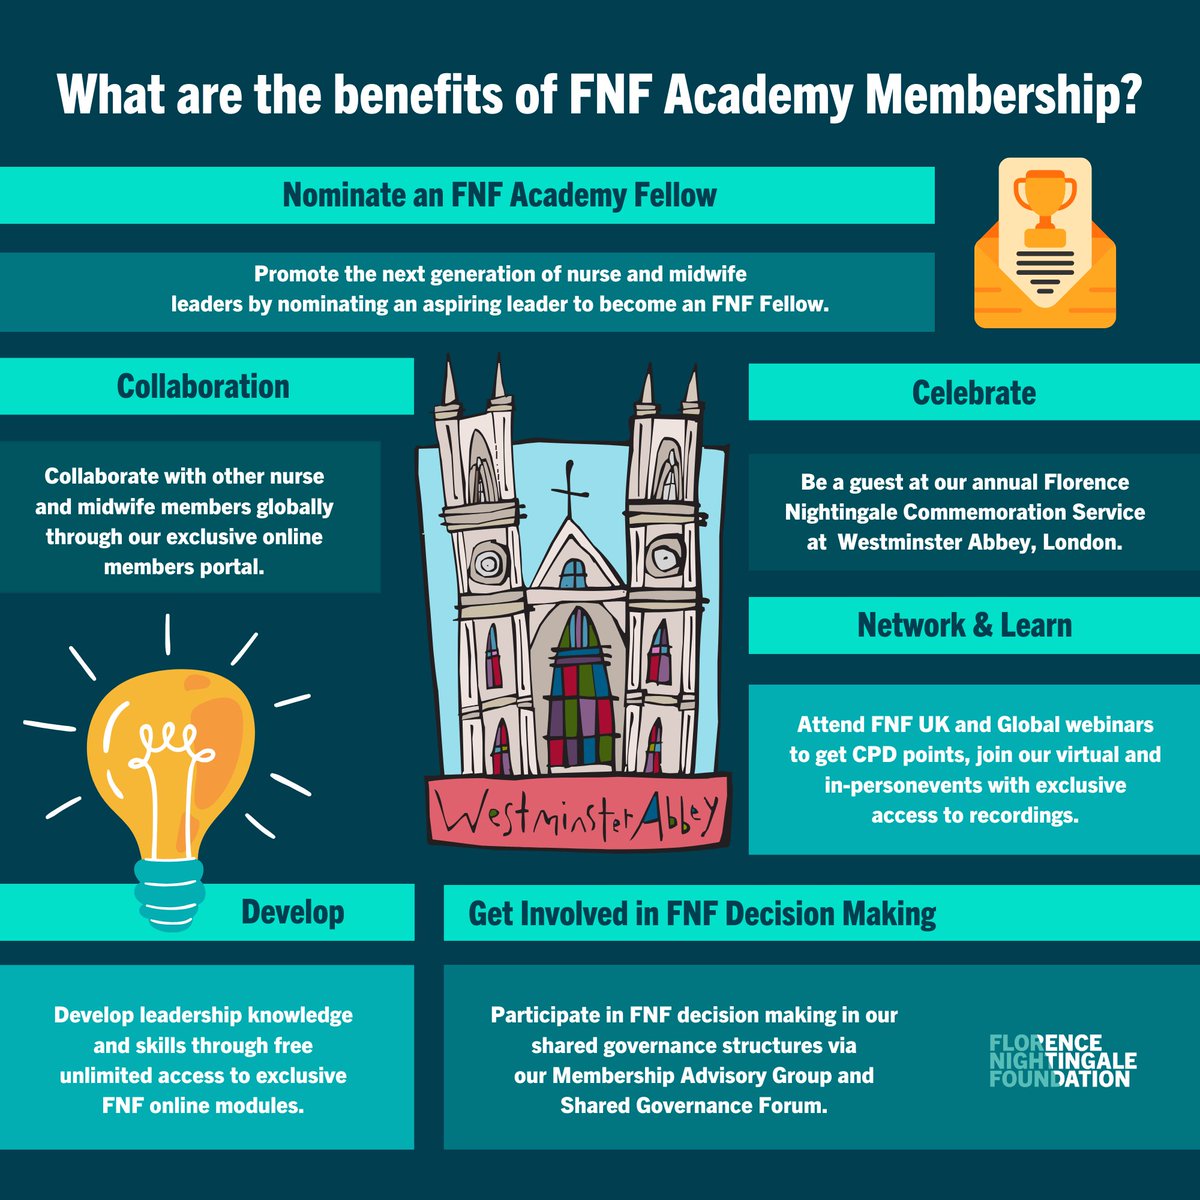 📢Renewals for our #FNFAcademyMembers should be with those of you who joined in April 2023. Please check your inboxes. We hope to welcome you back as Members for 2024! If you have any questions, get in touch or visit florence-nightingale-foundation.org.uk/academy/networ…